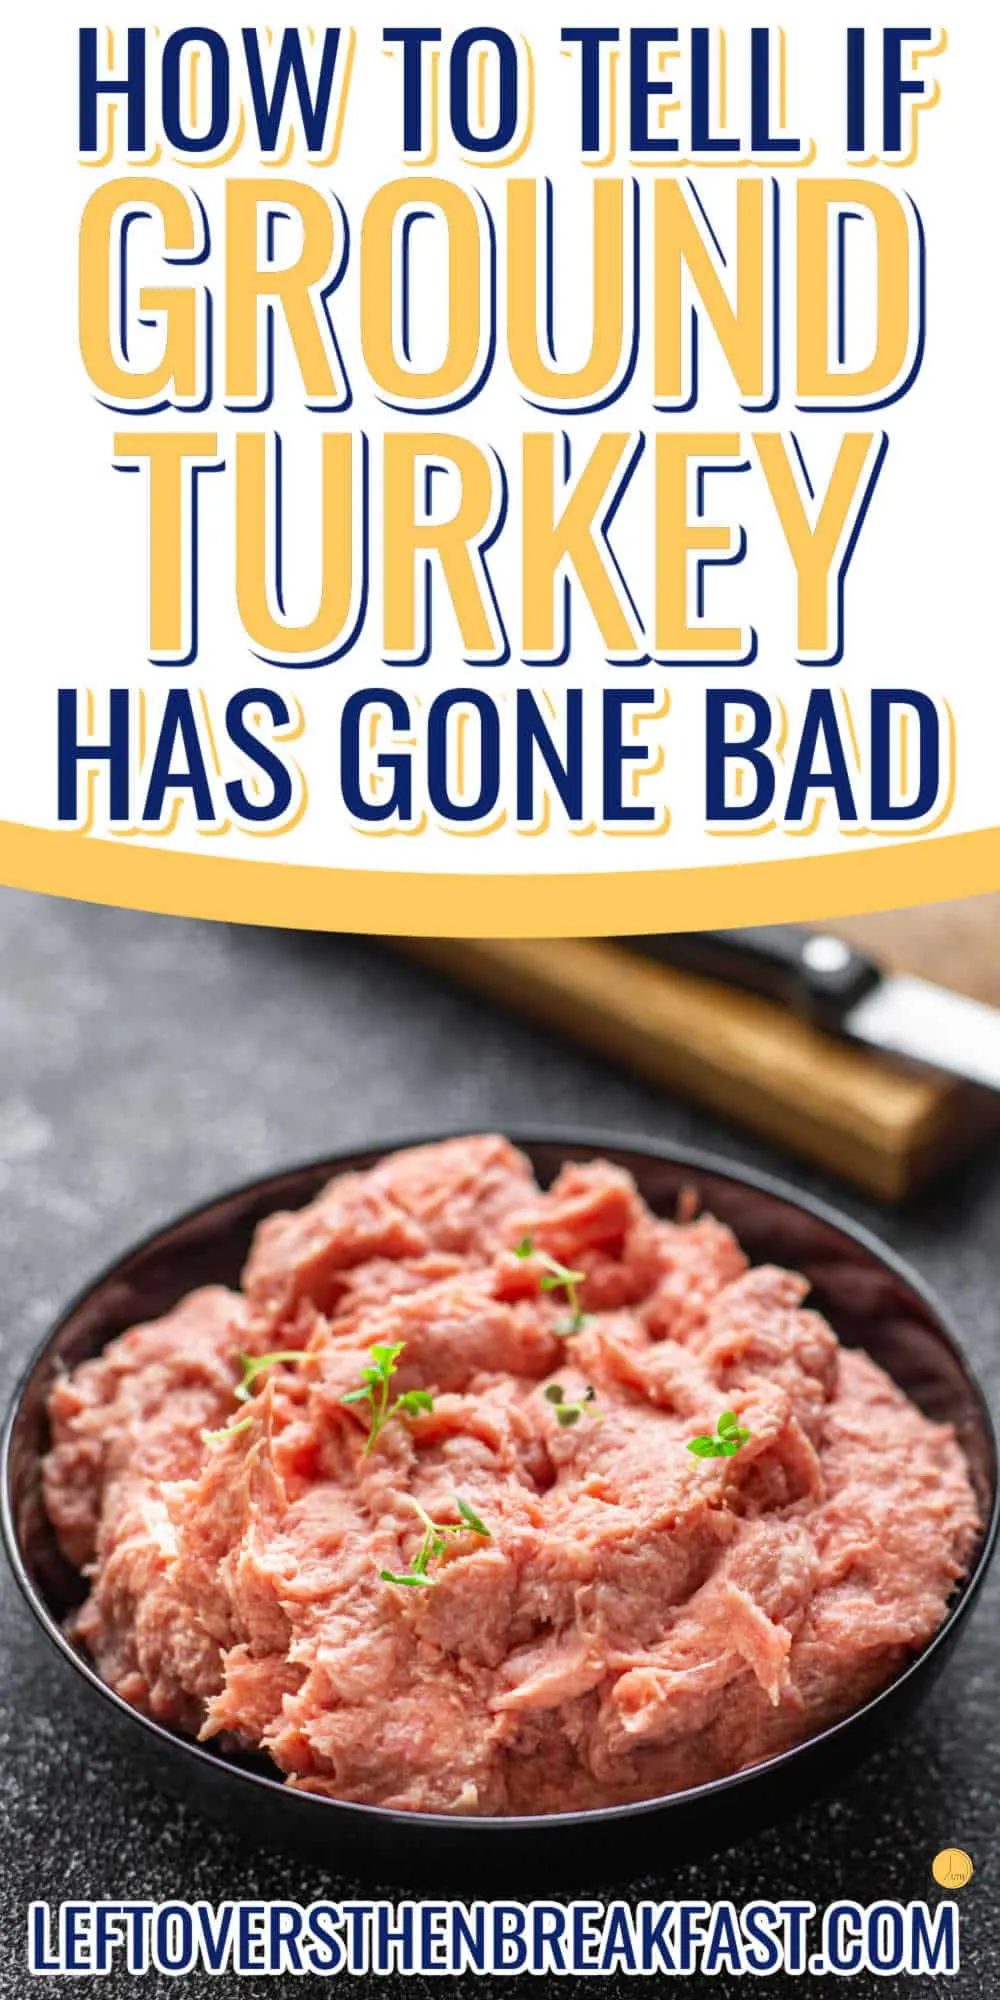 bowl of ground turkey with text "how to tell if ground turkey has gone bad"